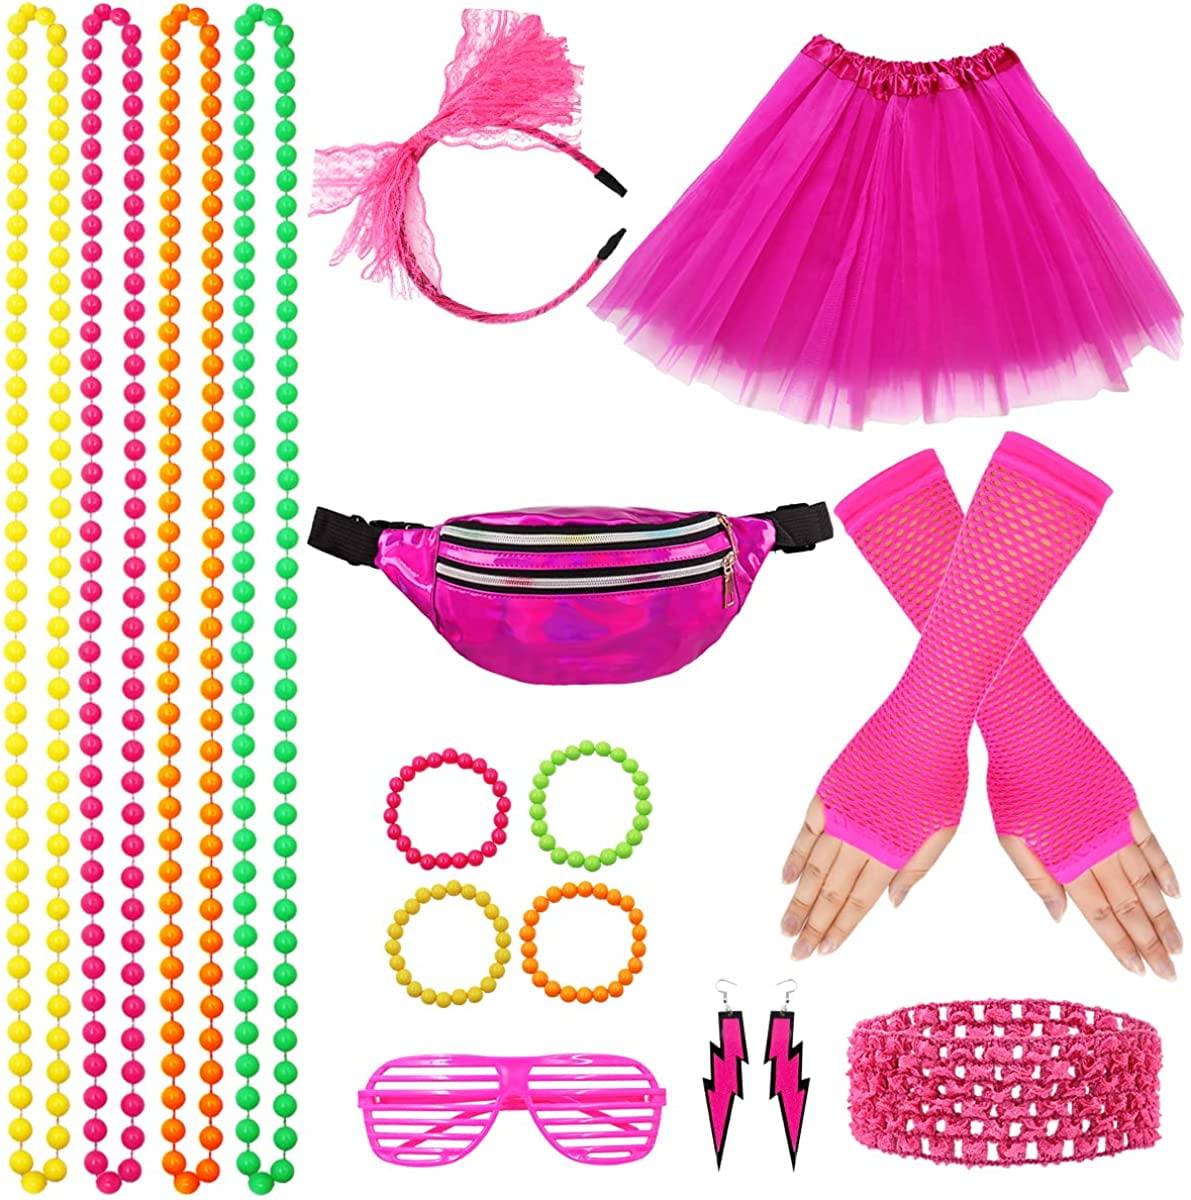 1980s Totally Rad Kit with Visor, Necklace & Fanny Pack, Pink/Blue, One  Size, 3-pk, Wearable Costume Accessories for Halloween